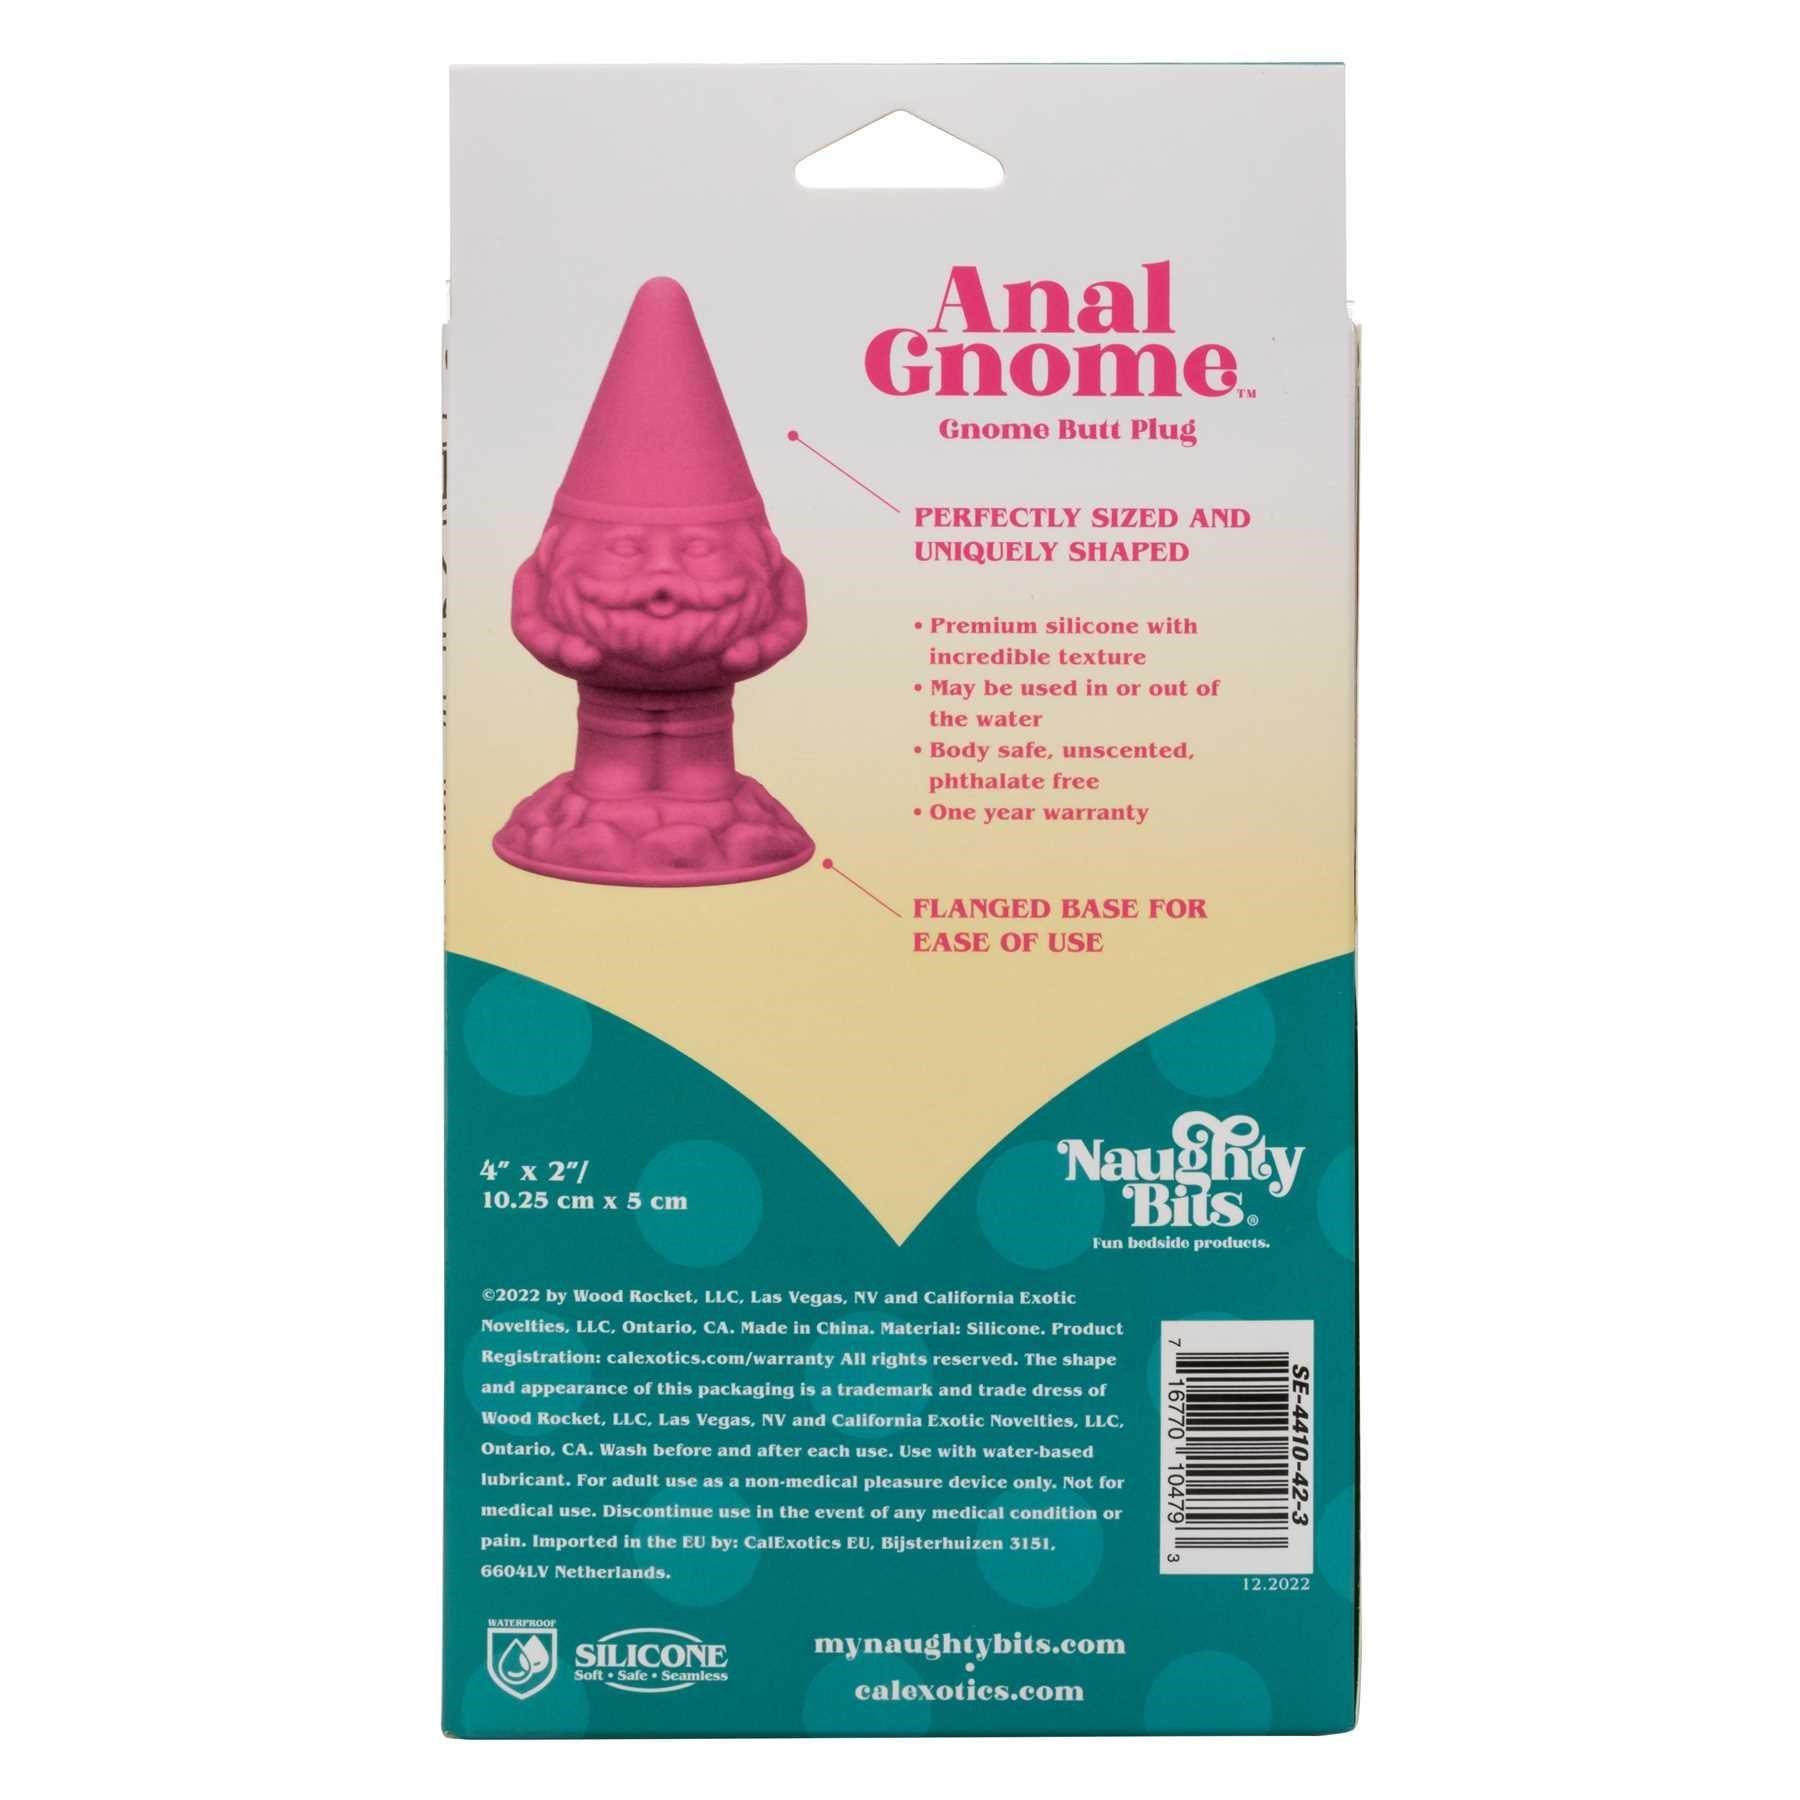 Naughty Bits Anal Gnome Butt Plug back of package